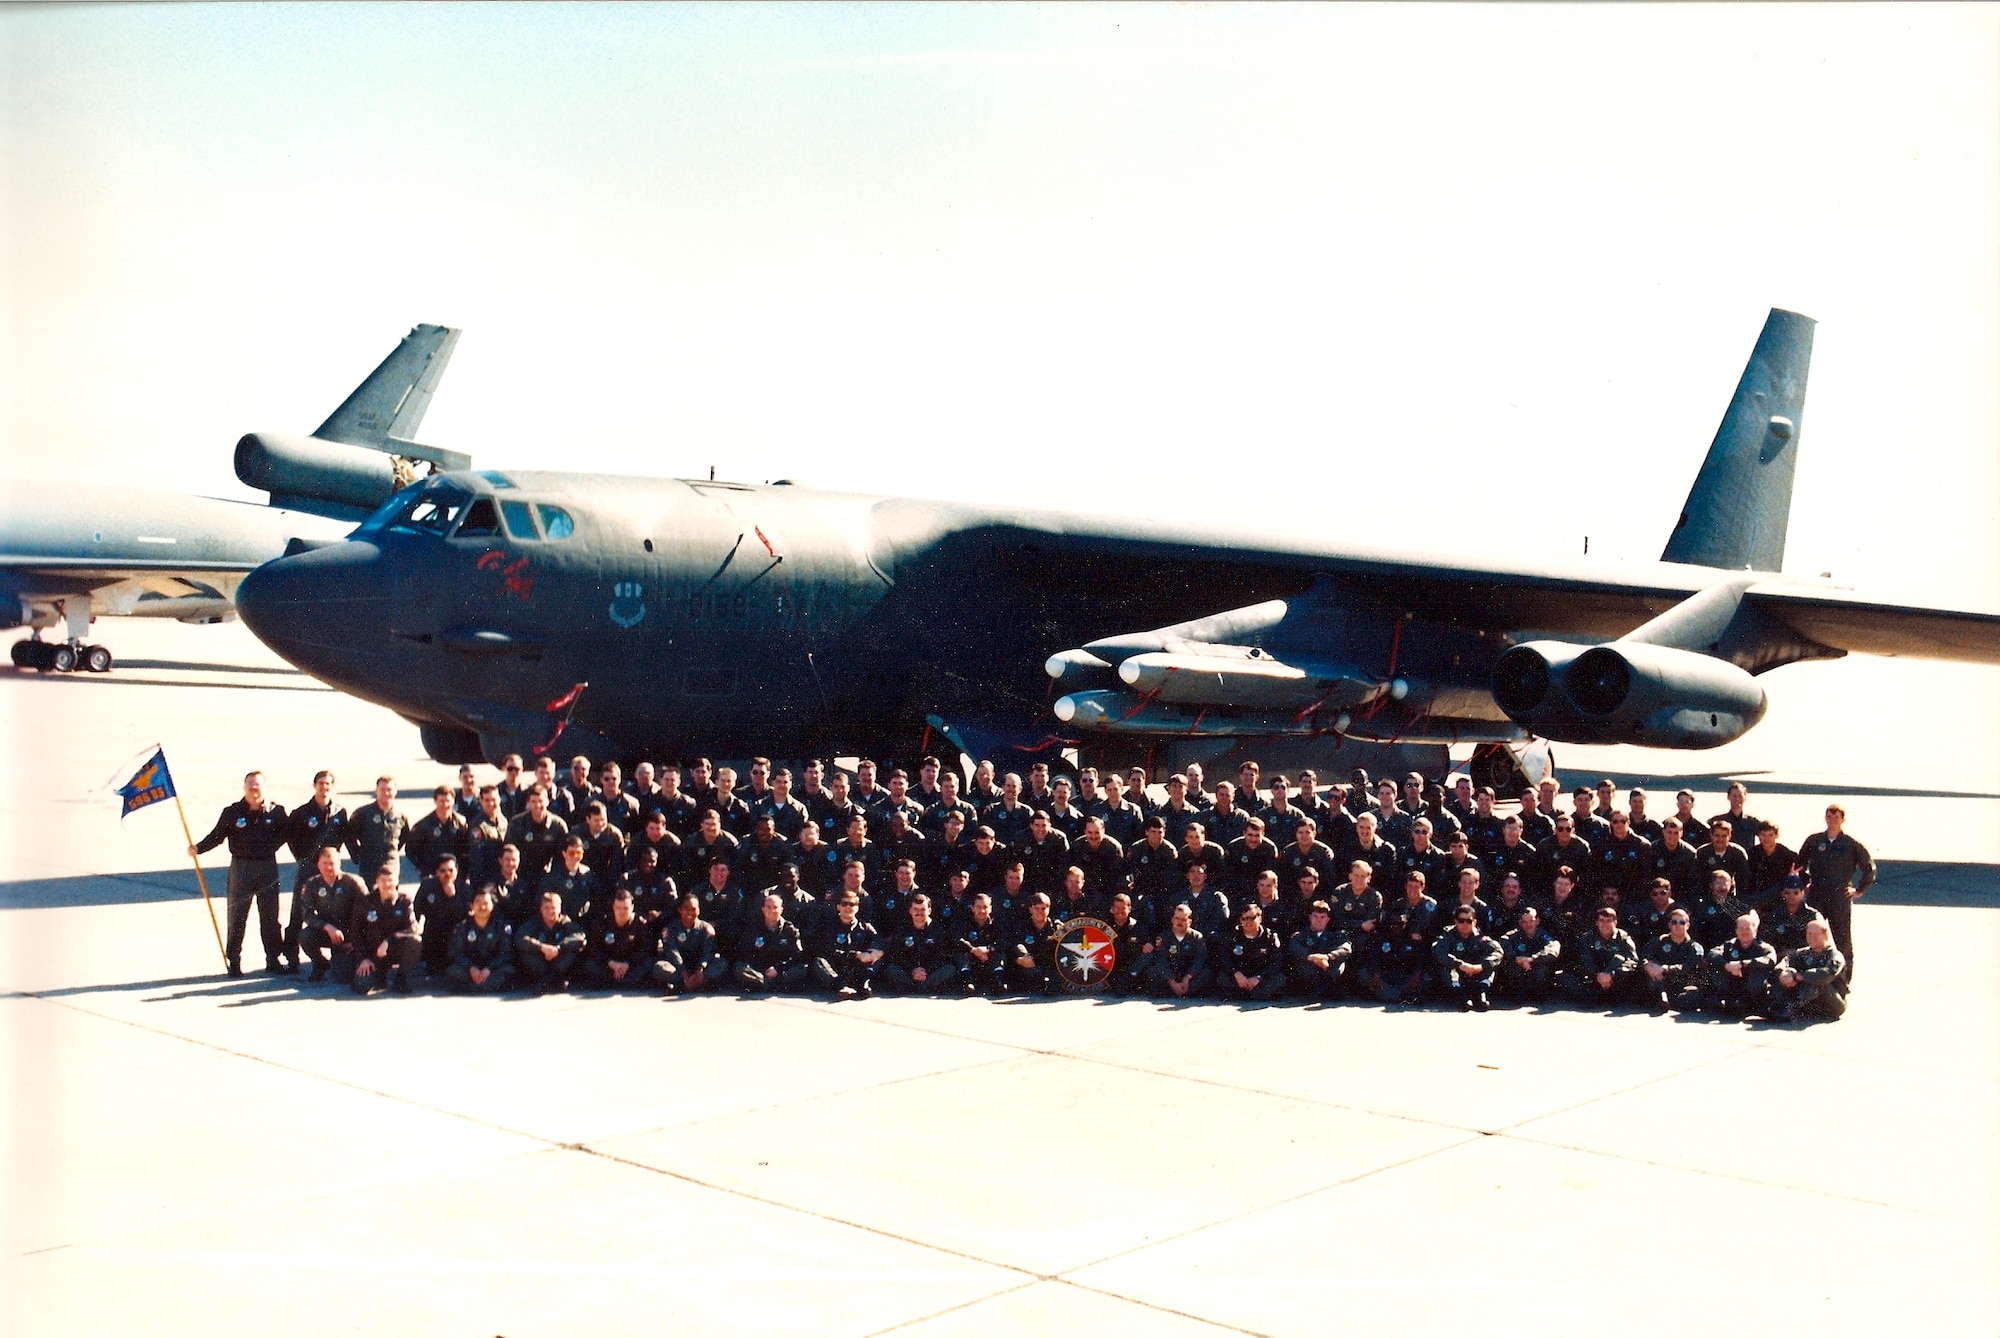 The 596th Bomb Squadron paved the way for American forces to defeat Iraqi dictator Saddam Hussein, whose troops had invaded neighboring Kuwait. Members of the 596th participated in Operation Senior Surprise, known as “Secret Squirrel” to the operators who would fly the mission. The bombers traveled more than 14,000 nautical miles non-stop and was the longest combat mission in history at the time. 